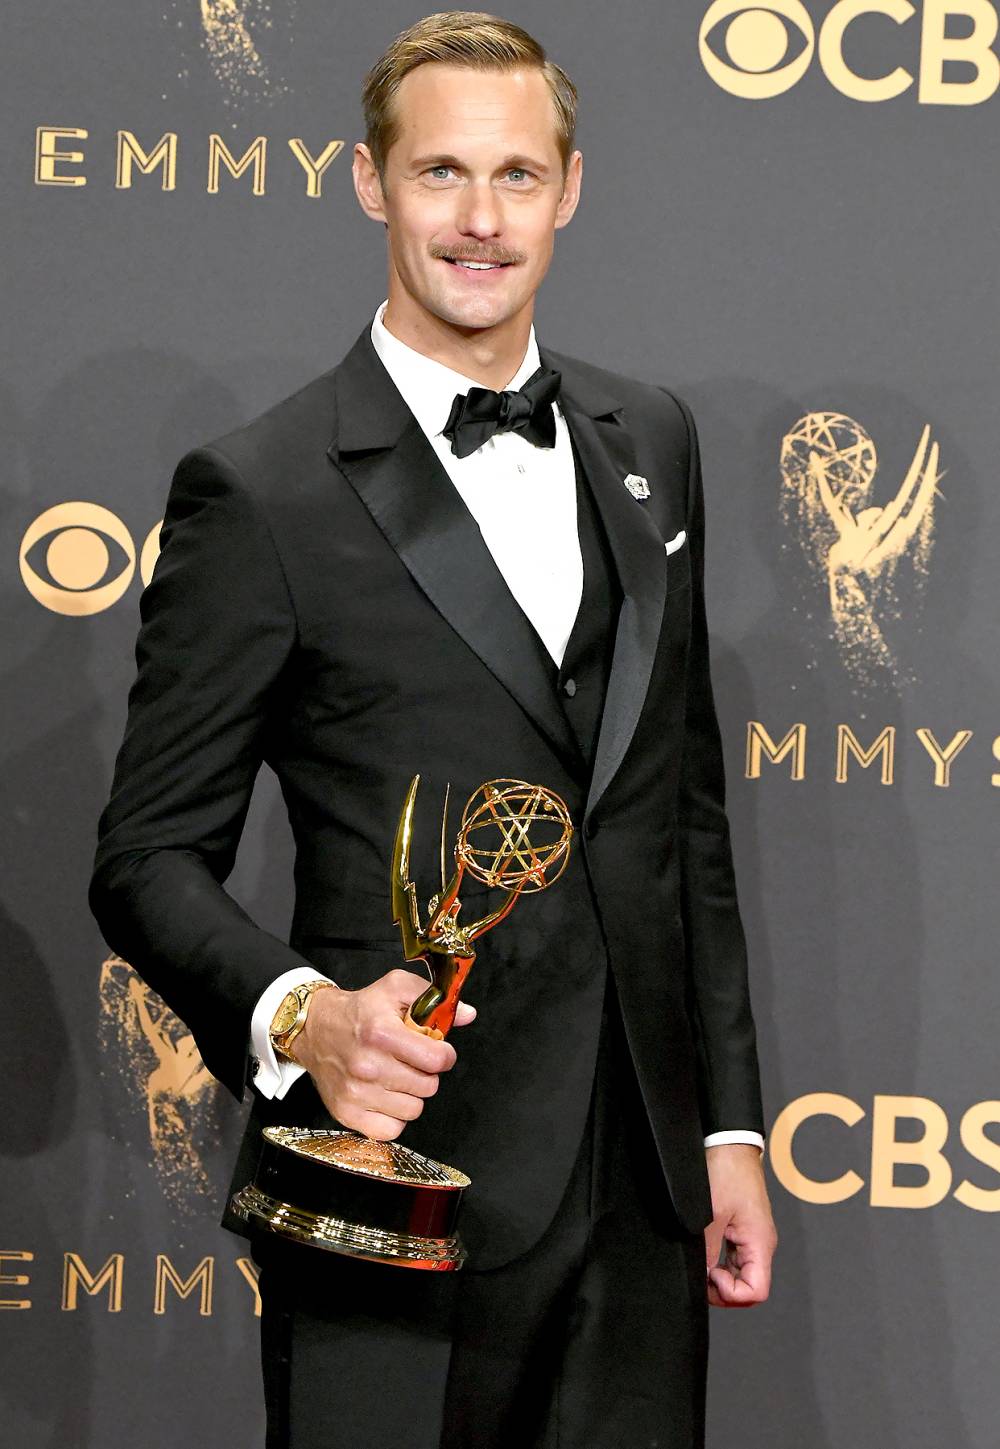 Alexander Skarsgard, winner of the award for Outstanding Supporting Actor in a Limited Series or Movie for 'Big Little Lies,' poses in the press room during the 69th Annual Primetime Emmy Awards at Microsoft Theater on September 17, 2017 in Los Angeles, California.